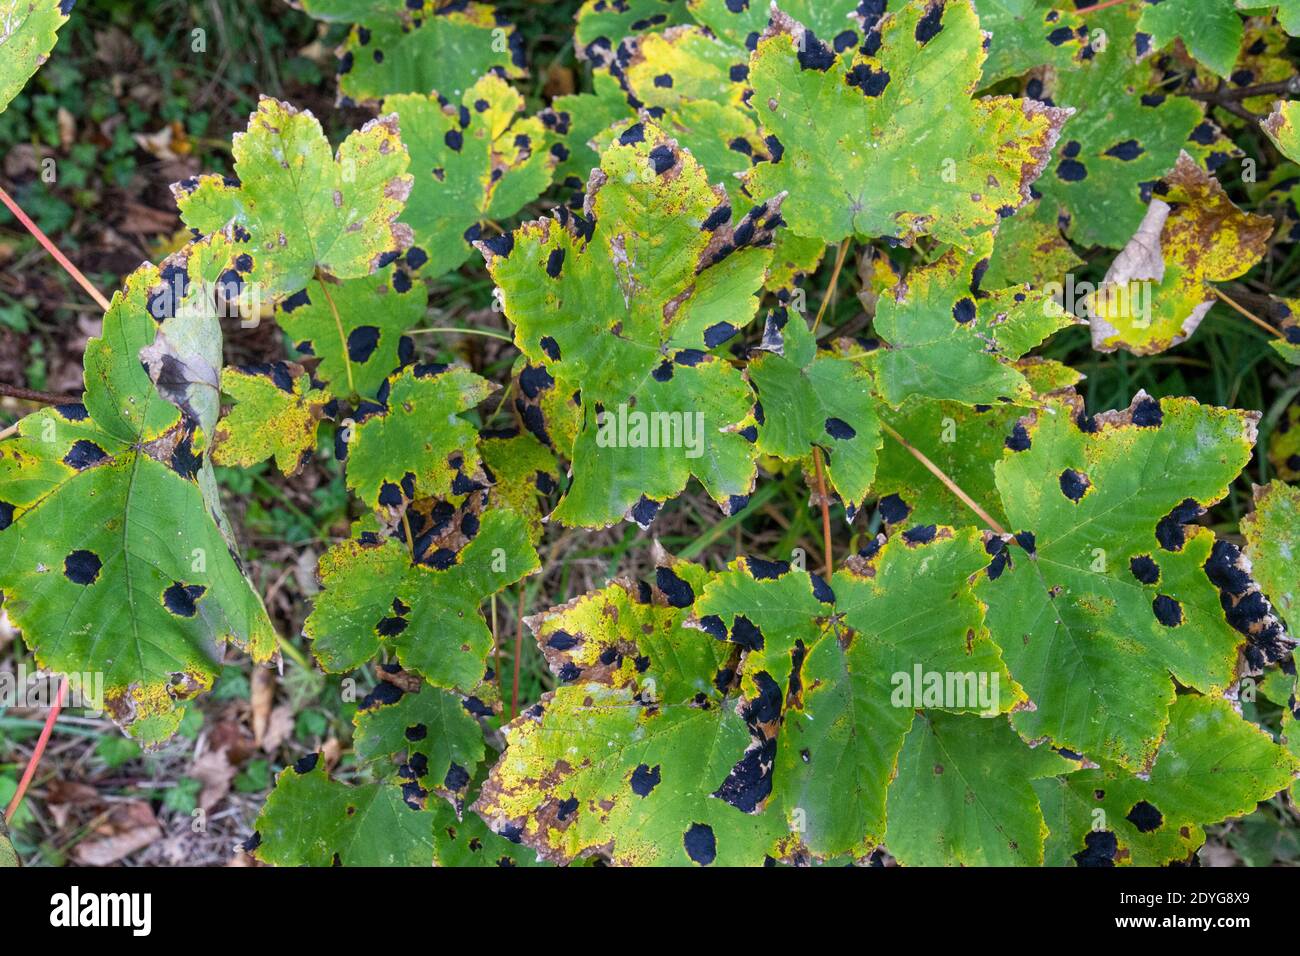 Tar spots, a leaf spot disease caused by the fungus Rhytisma acerinum on sycamore leaves beside the River Thames, Barnes, London, UK. Stock Photo